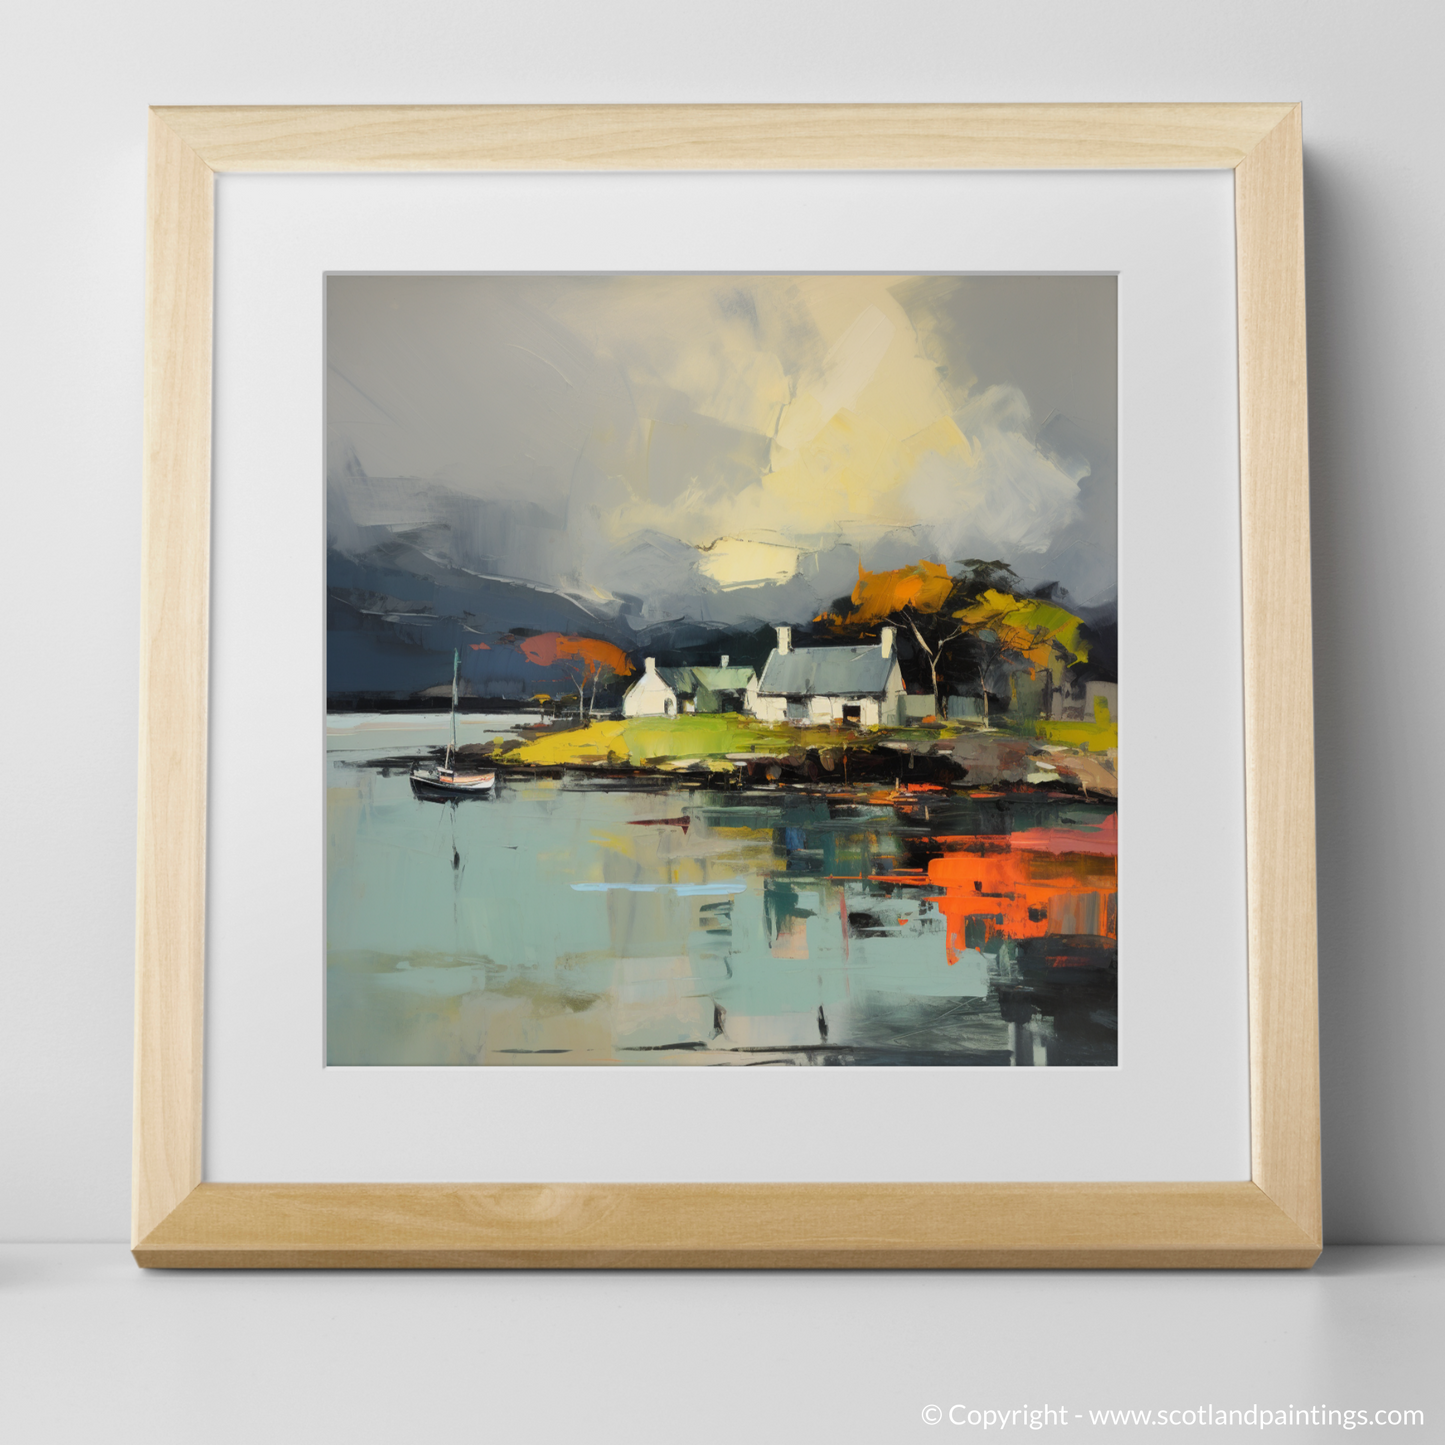 Storm Over Port Appin: An Abstract Harbour Drama